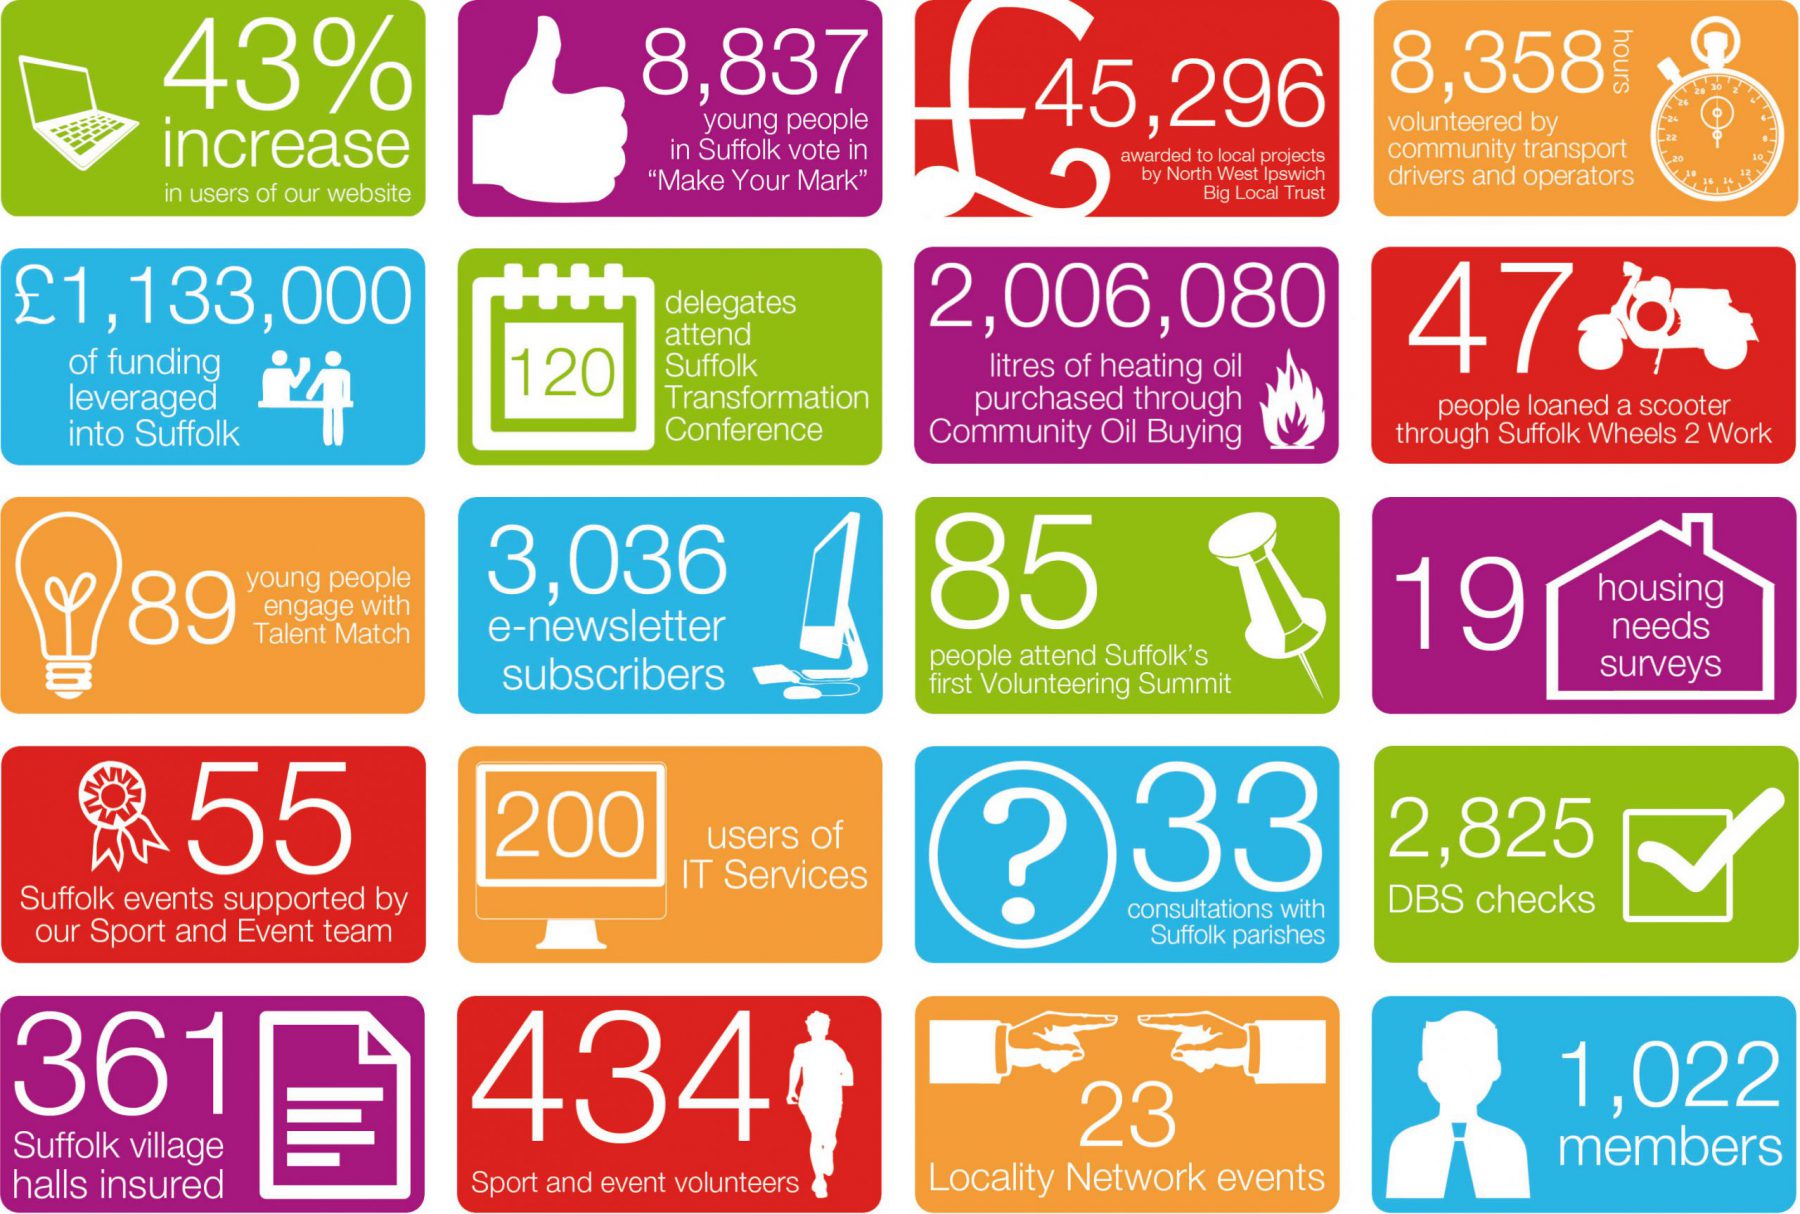 CAS Annual Review 2014-15 - stats for website